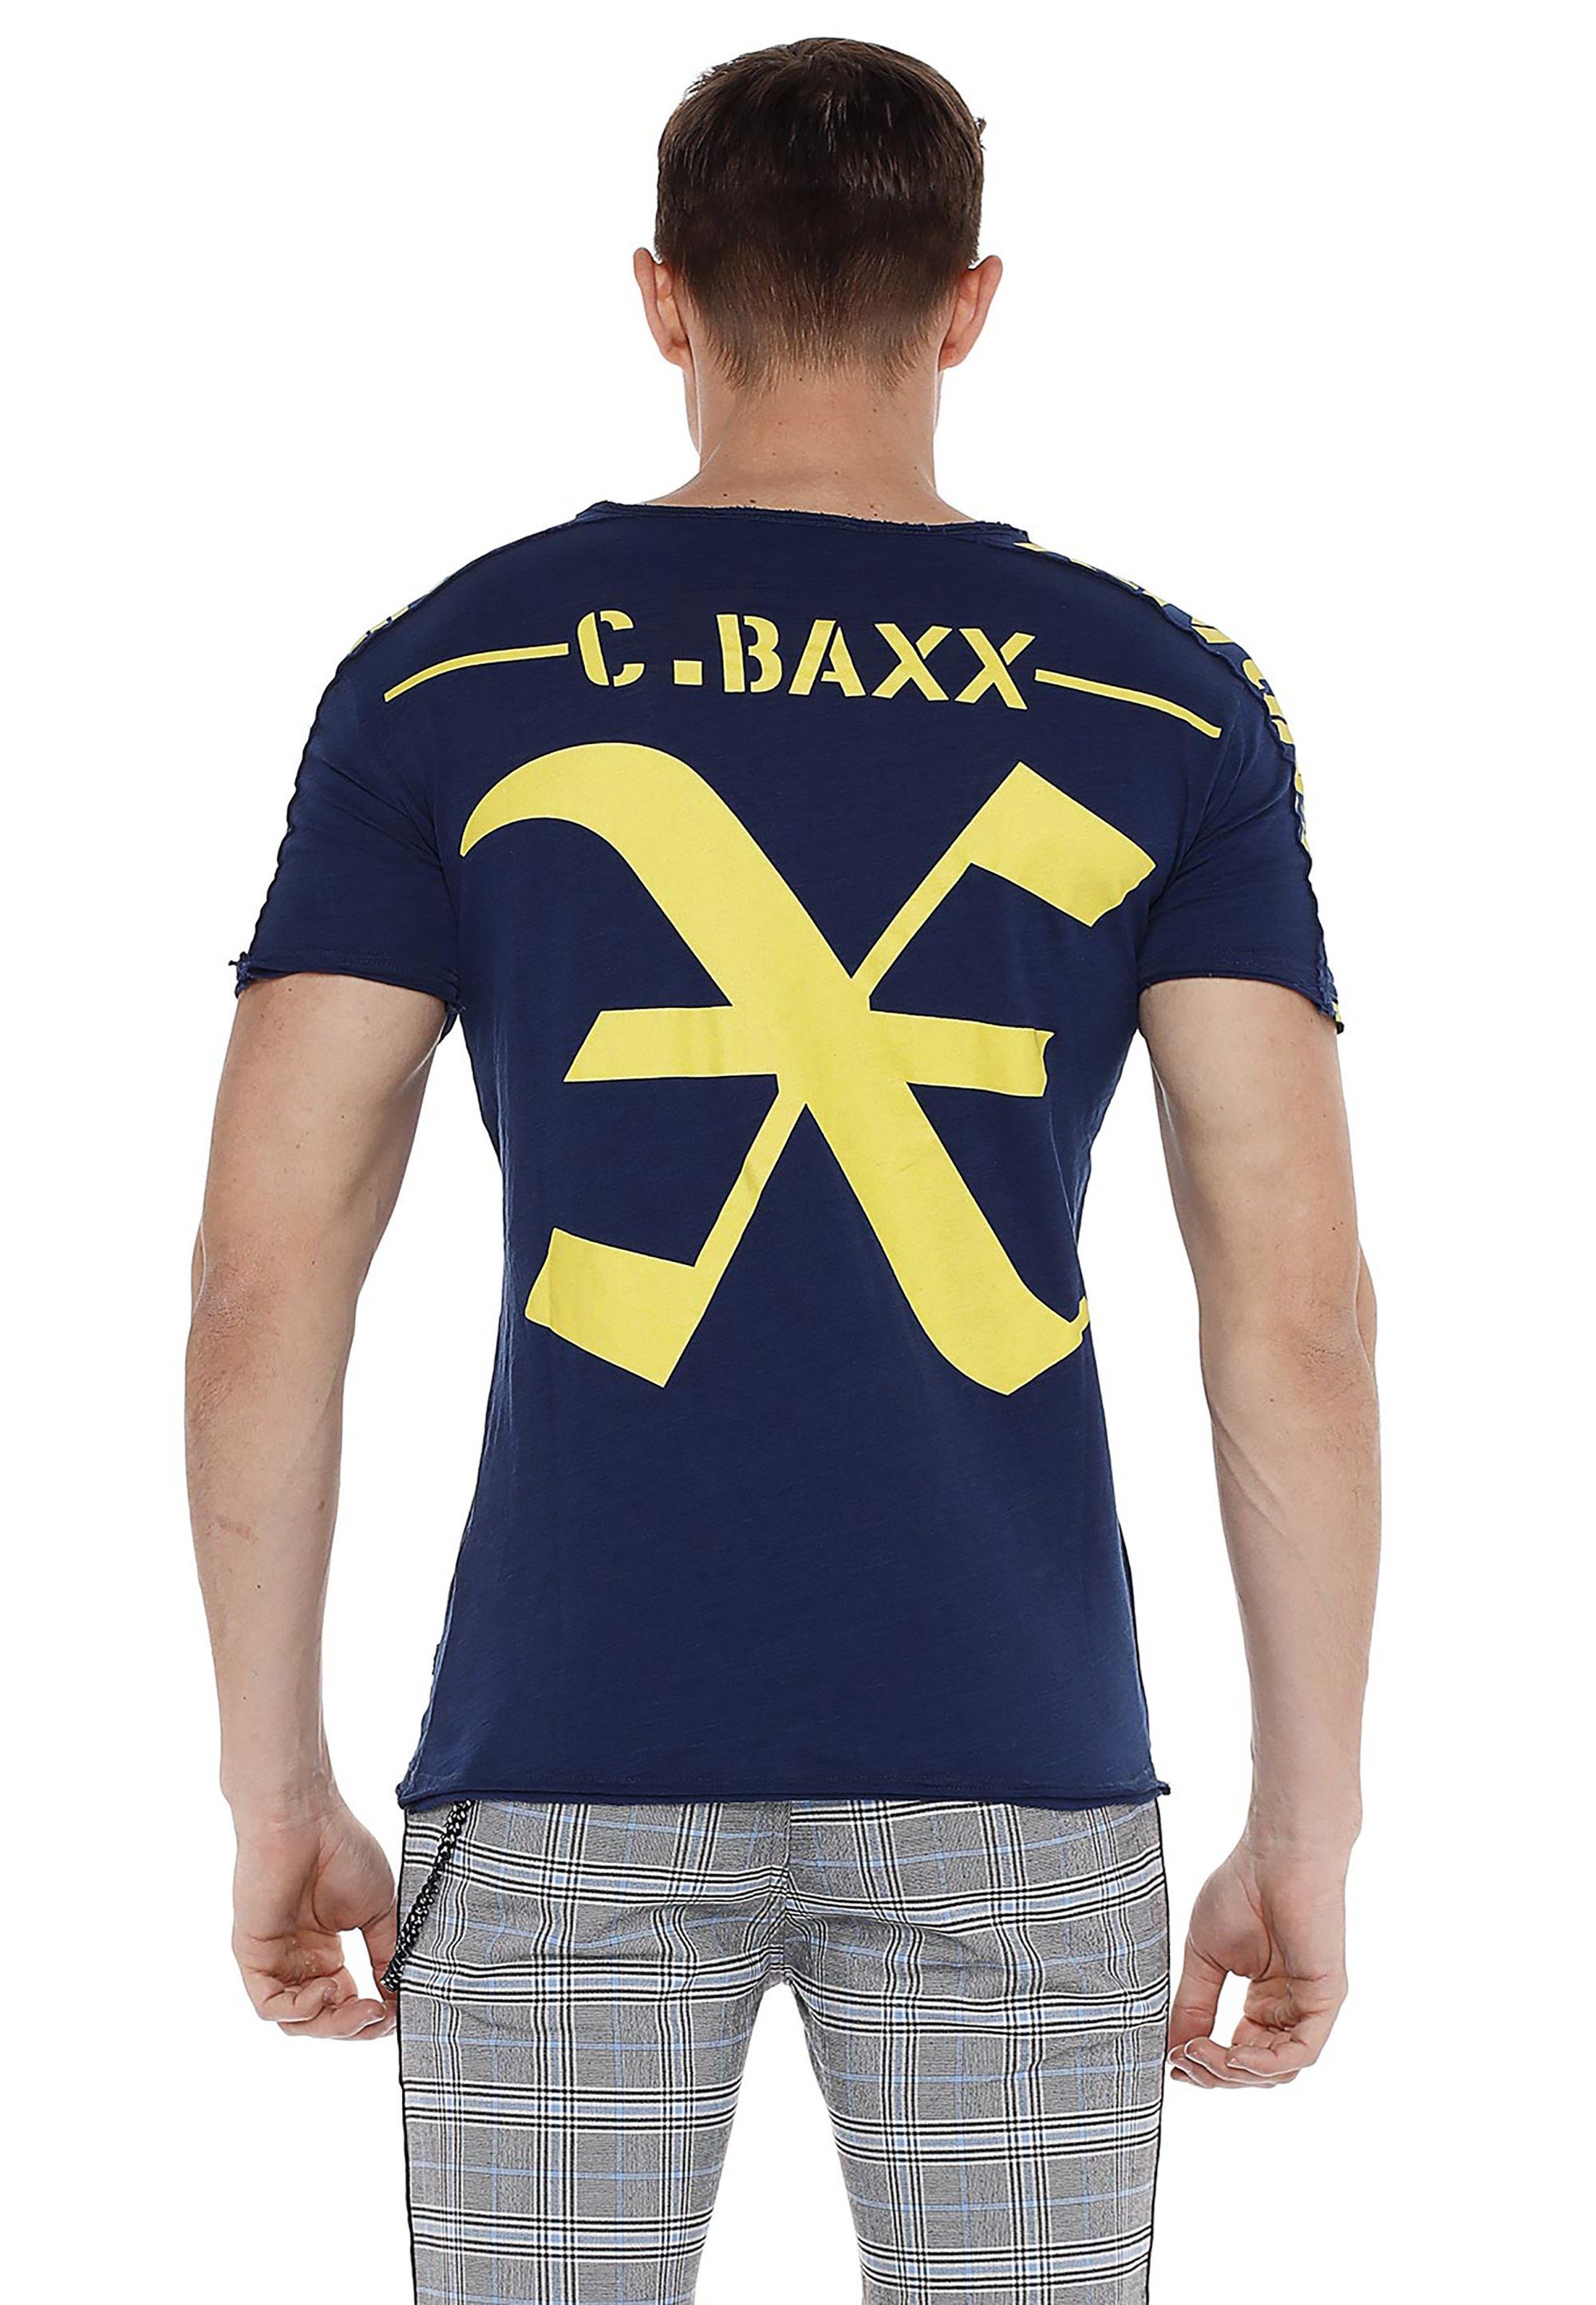 Baxx Cipo im T-Shirt & Relaxed-Fit